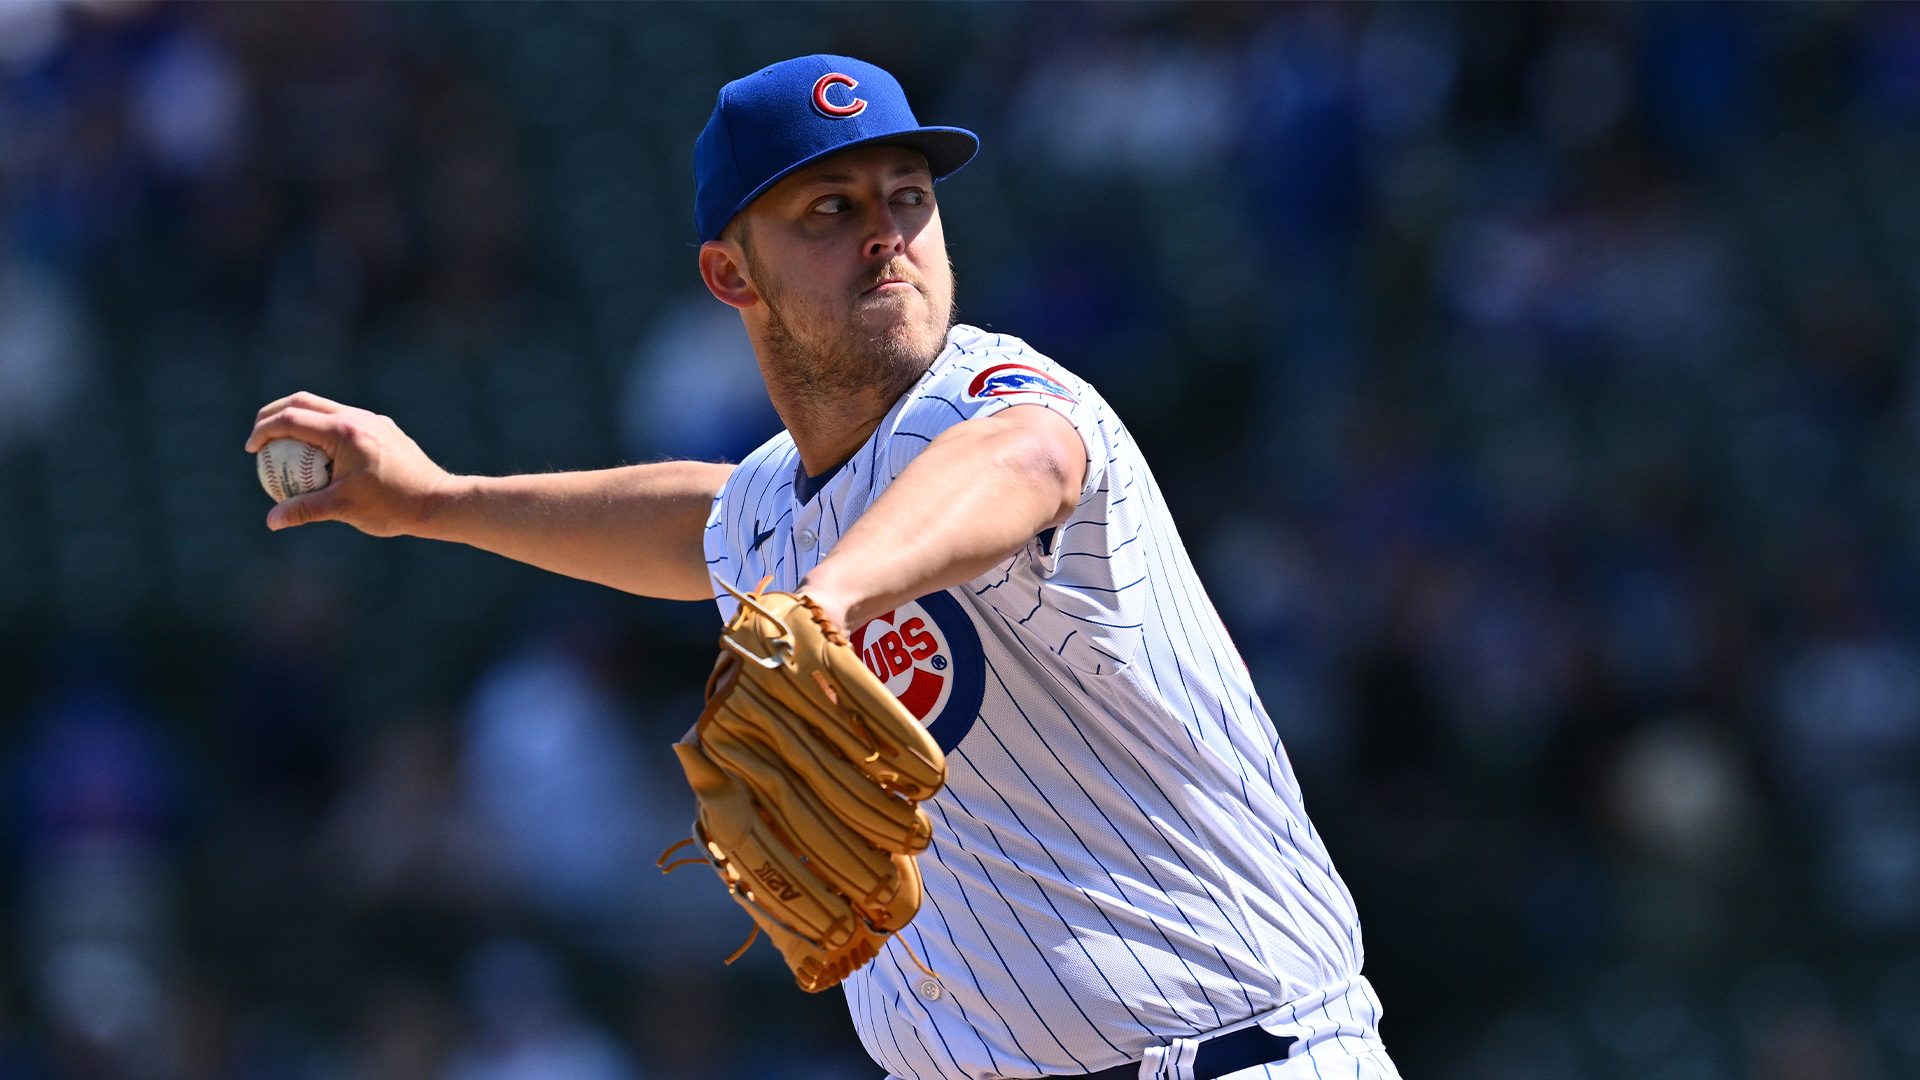 Cubs make roster move as Jameson Taillon heads to IL – NBC Sports